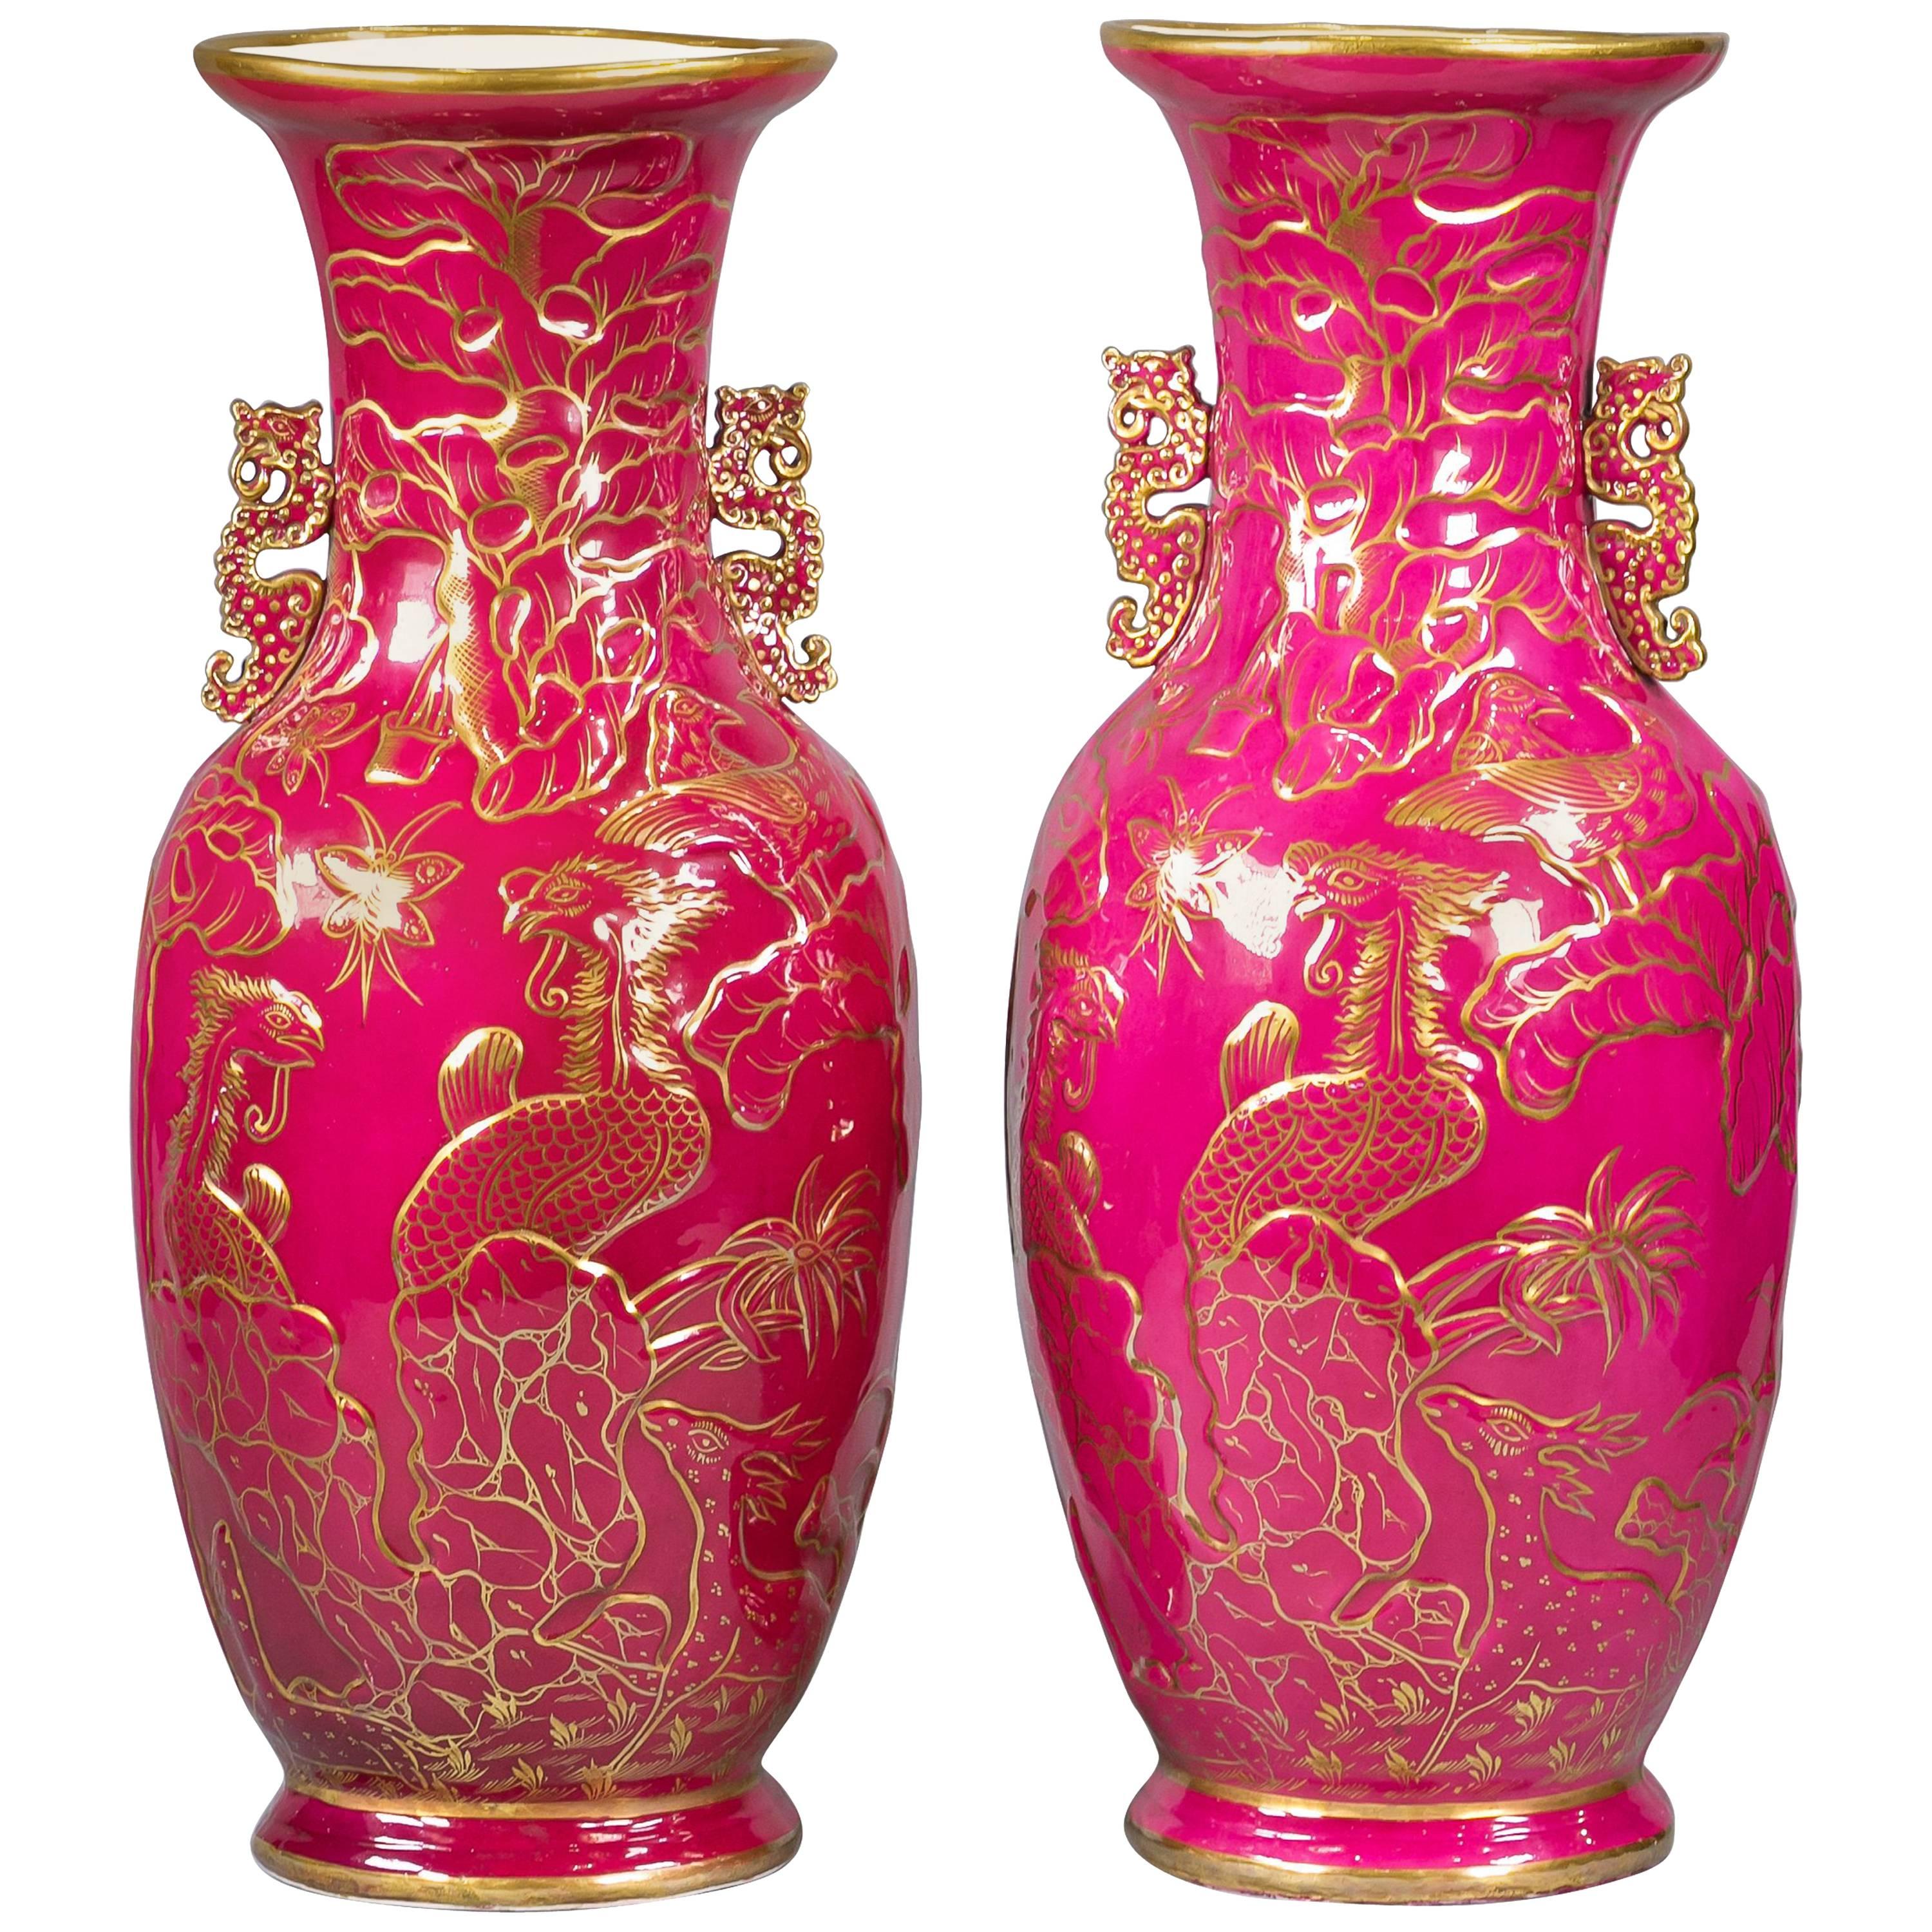 Pair of Large English Porcelain Chinoiserie Vases, circa 1860